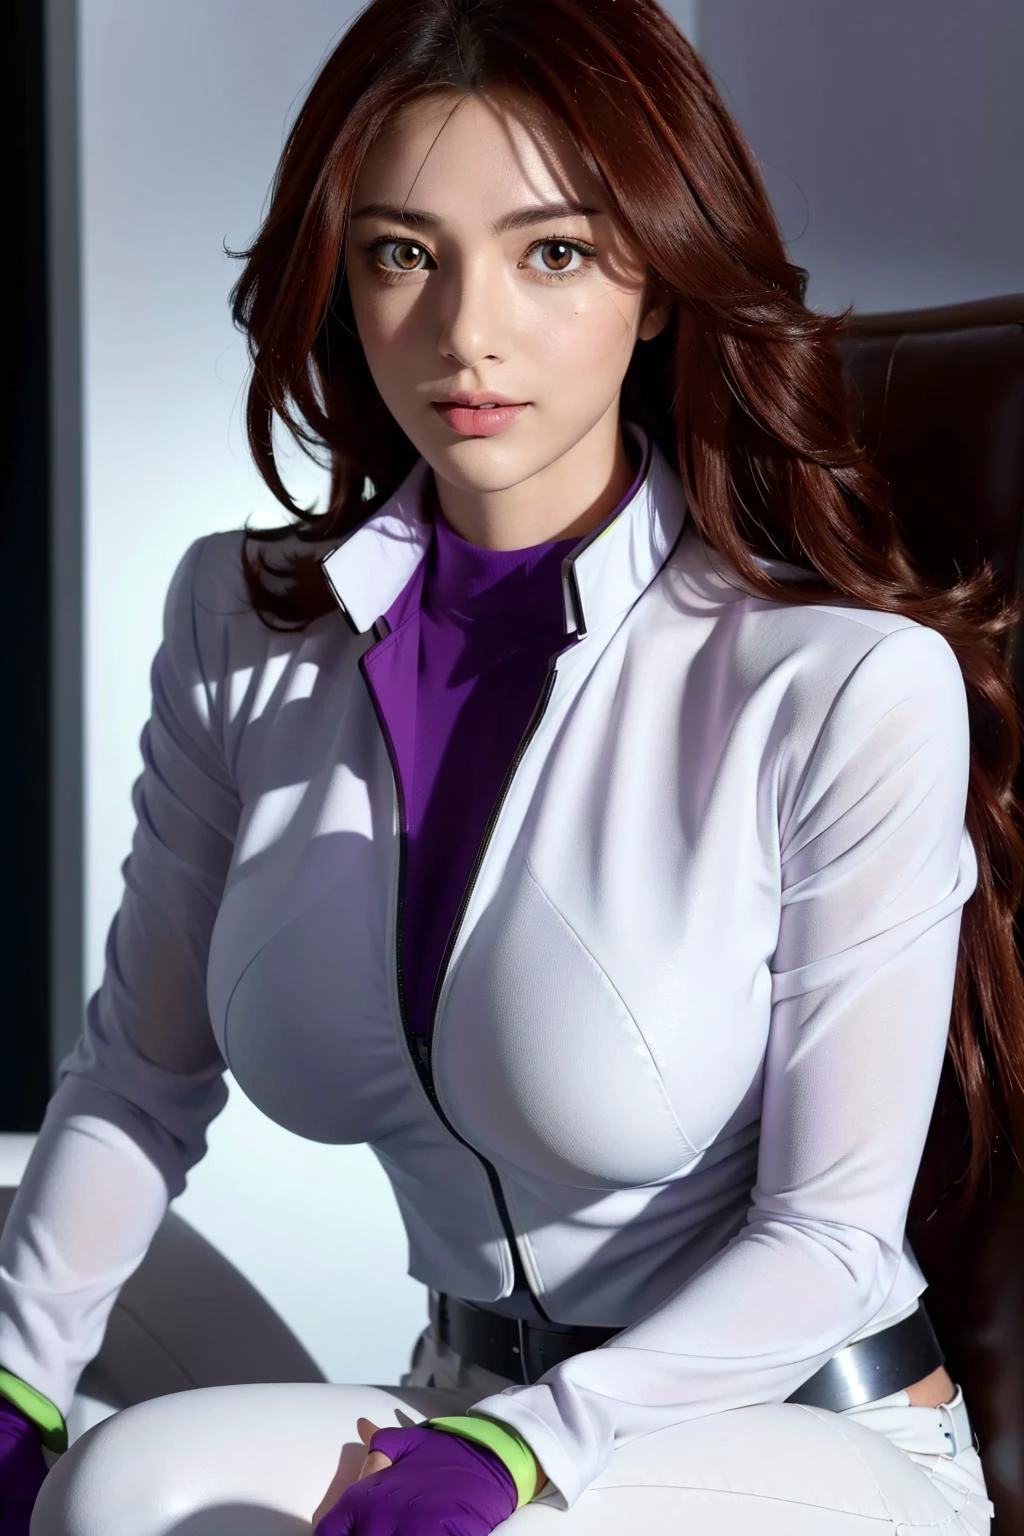 (Night:1.7),a space battleship in space,
dynamic pose,sitting in grey chair,
white pants,belt, white shirt,long sleeves,gloves,(purple_jacket:1.2),(purple_suit:1.2)
bangs,brown_hair, long_hair,red eyes,lipstick,makeup,
,1 girl, 18yo,Young female,Beautiful long legs,Beautiful body,
Beautiful Nose,Beautiful character design, perfect eyes, perfect face,expressive eyes,perfect balance,
looking at viewer,closed mouth, (innocent_big_eyes:1.3),(Light_Smile:0.3),
official art,extremely detailed CG unity 8k wallpaper, perfect lighting,Colorful, Bright_Front_face_Lighting,White skin,
(masterpiece:1.0),(best_quality:1.0), ultra high res,4K,ultra-detailed,
photography, 8K, HDR, highres, absurdres:1.2, Kodak portra 400, film grain, blurry background, bokeh:1.2, lens flare, (vibrant_color:1.2),professional photograph,
(Beautiful,huge_Breasts:1.4), (beautiful_face:1.5),(narrow_waist),